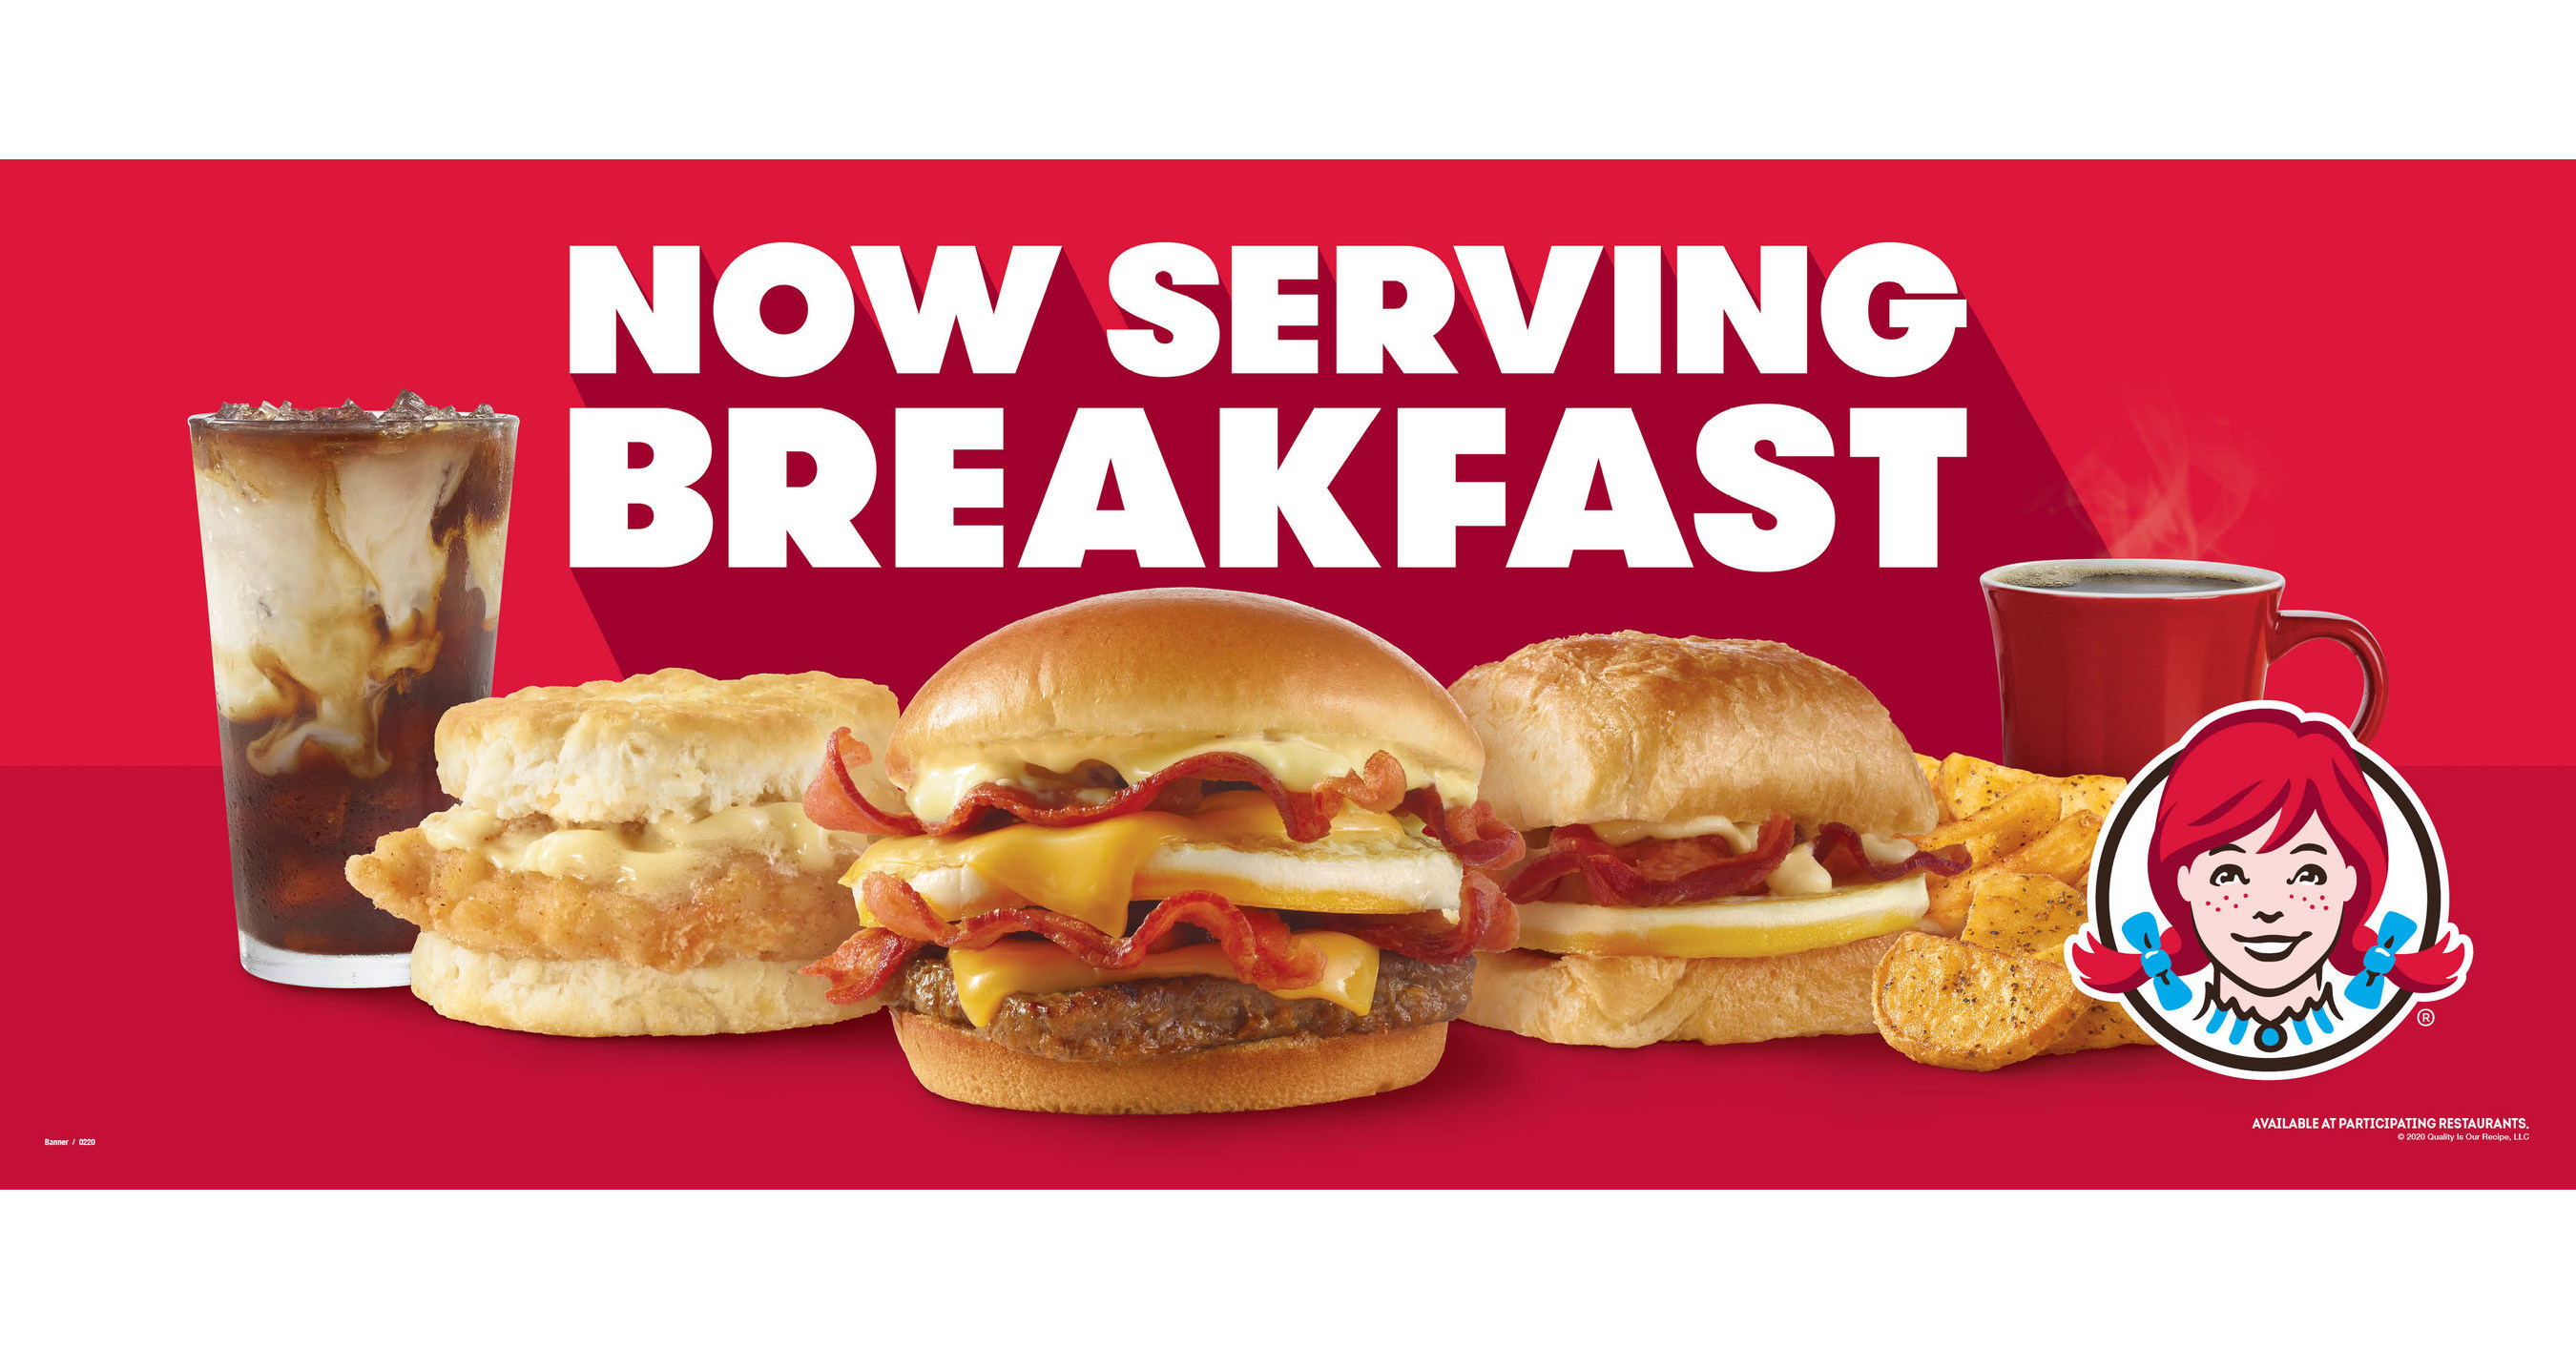 What Time Does Wendys Open To Serve Breakfast